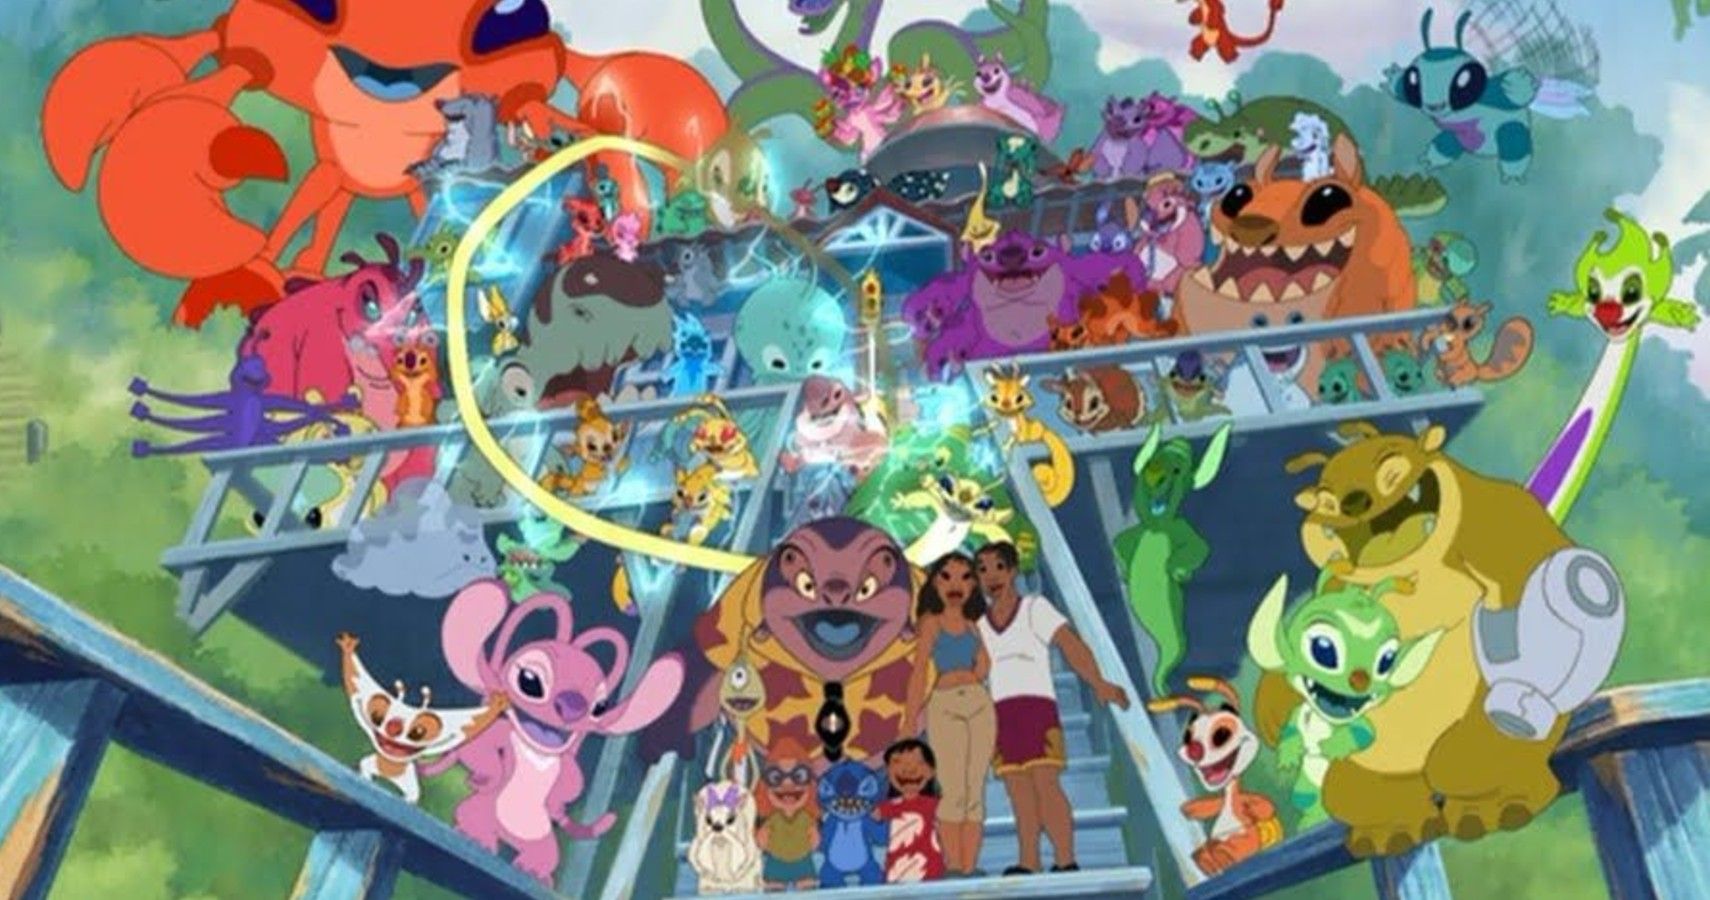 Lilo & Stitch but Jumba is the only character 